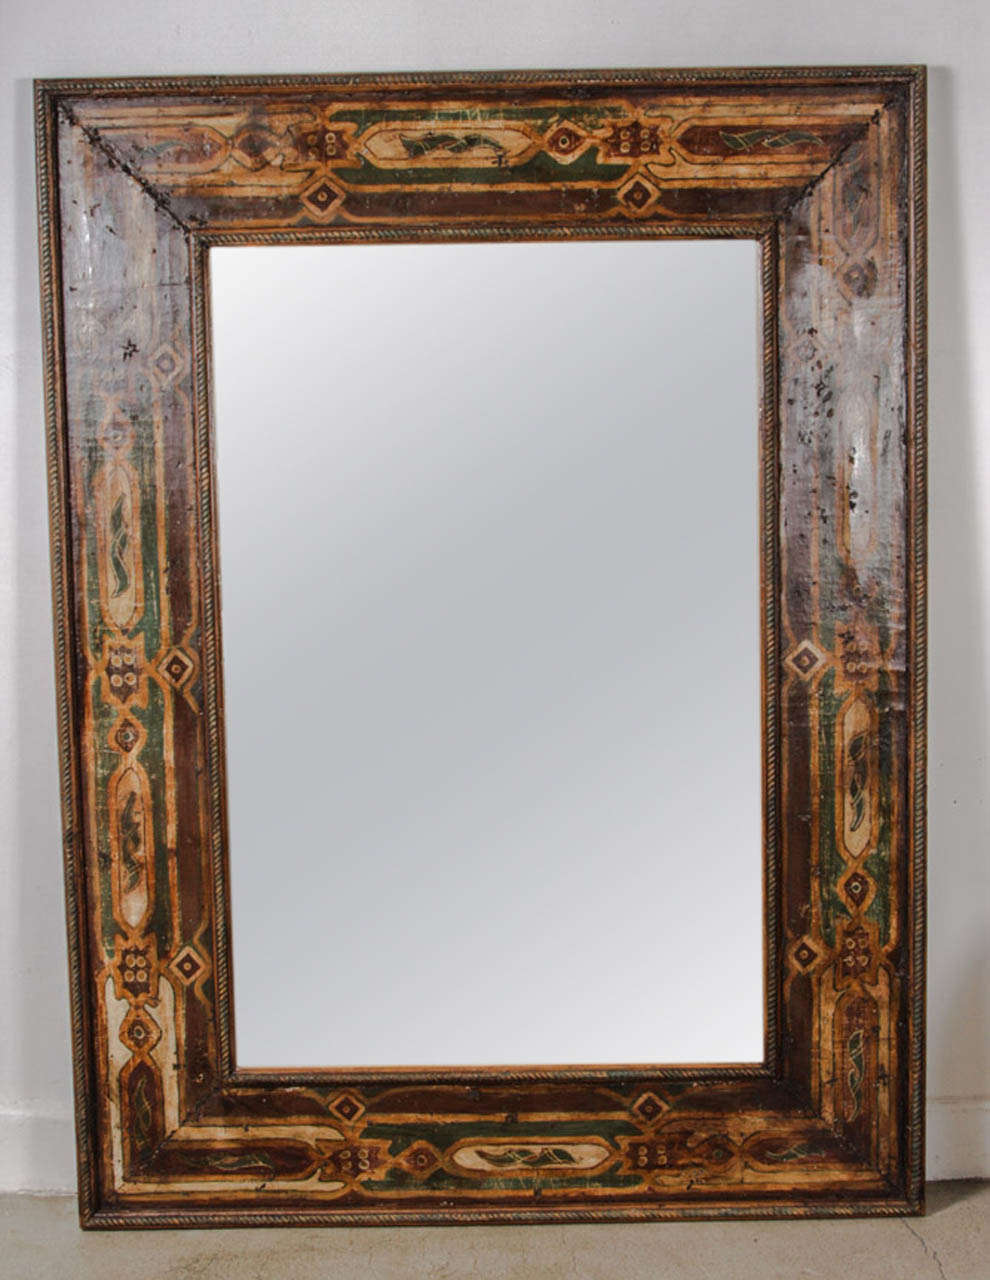 Large wooden hand-painted Spanish colonial style mirror.
Spanish Moorish style mirror that could be used in horizontal or vertical way.